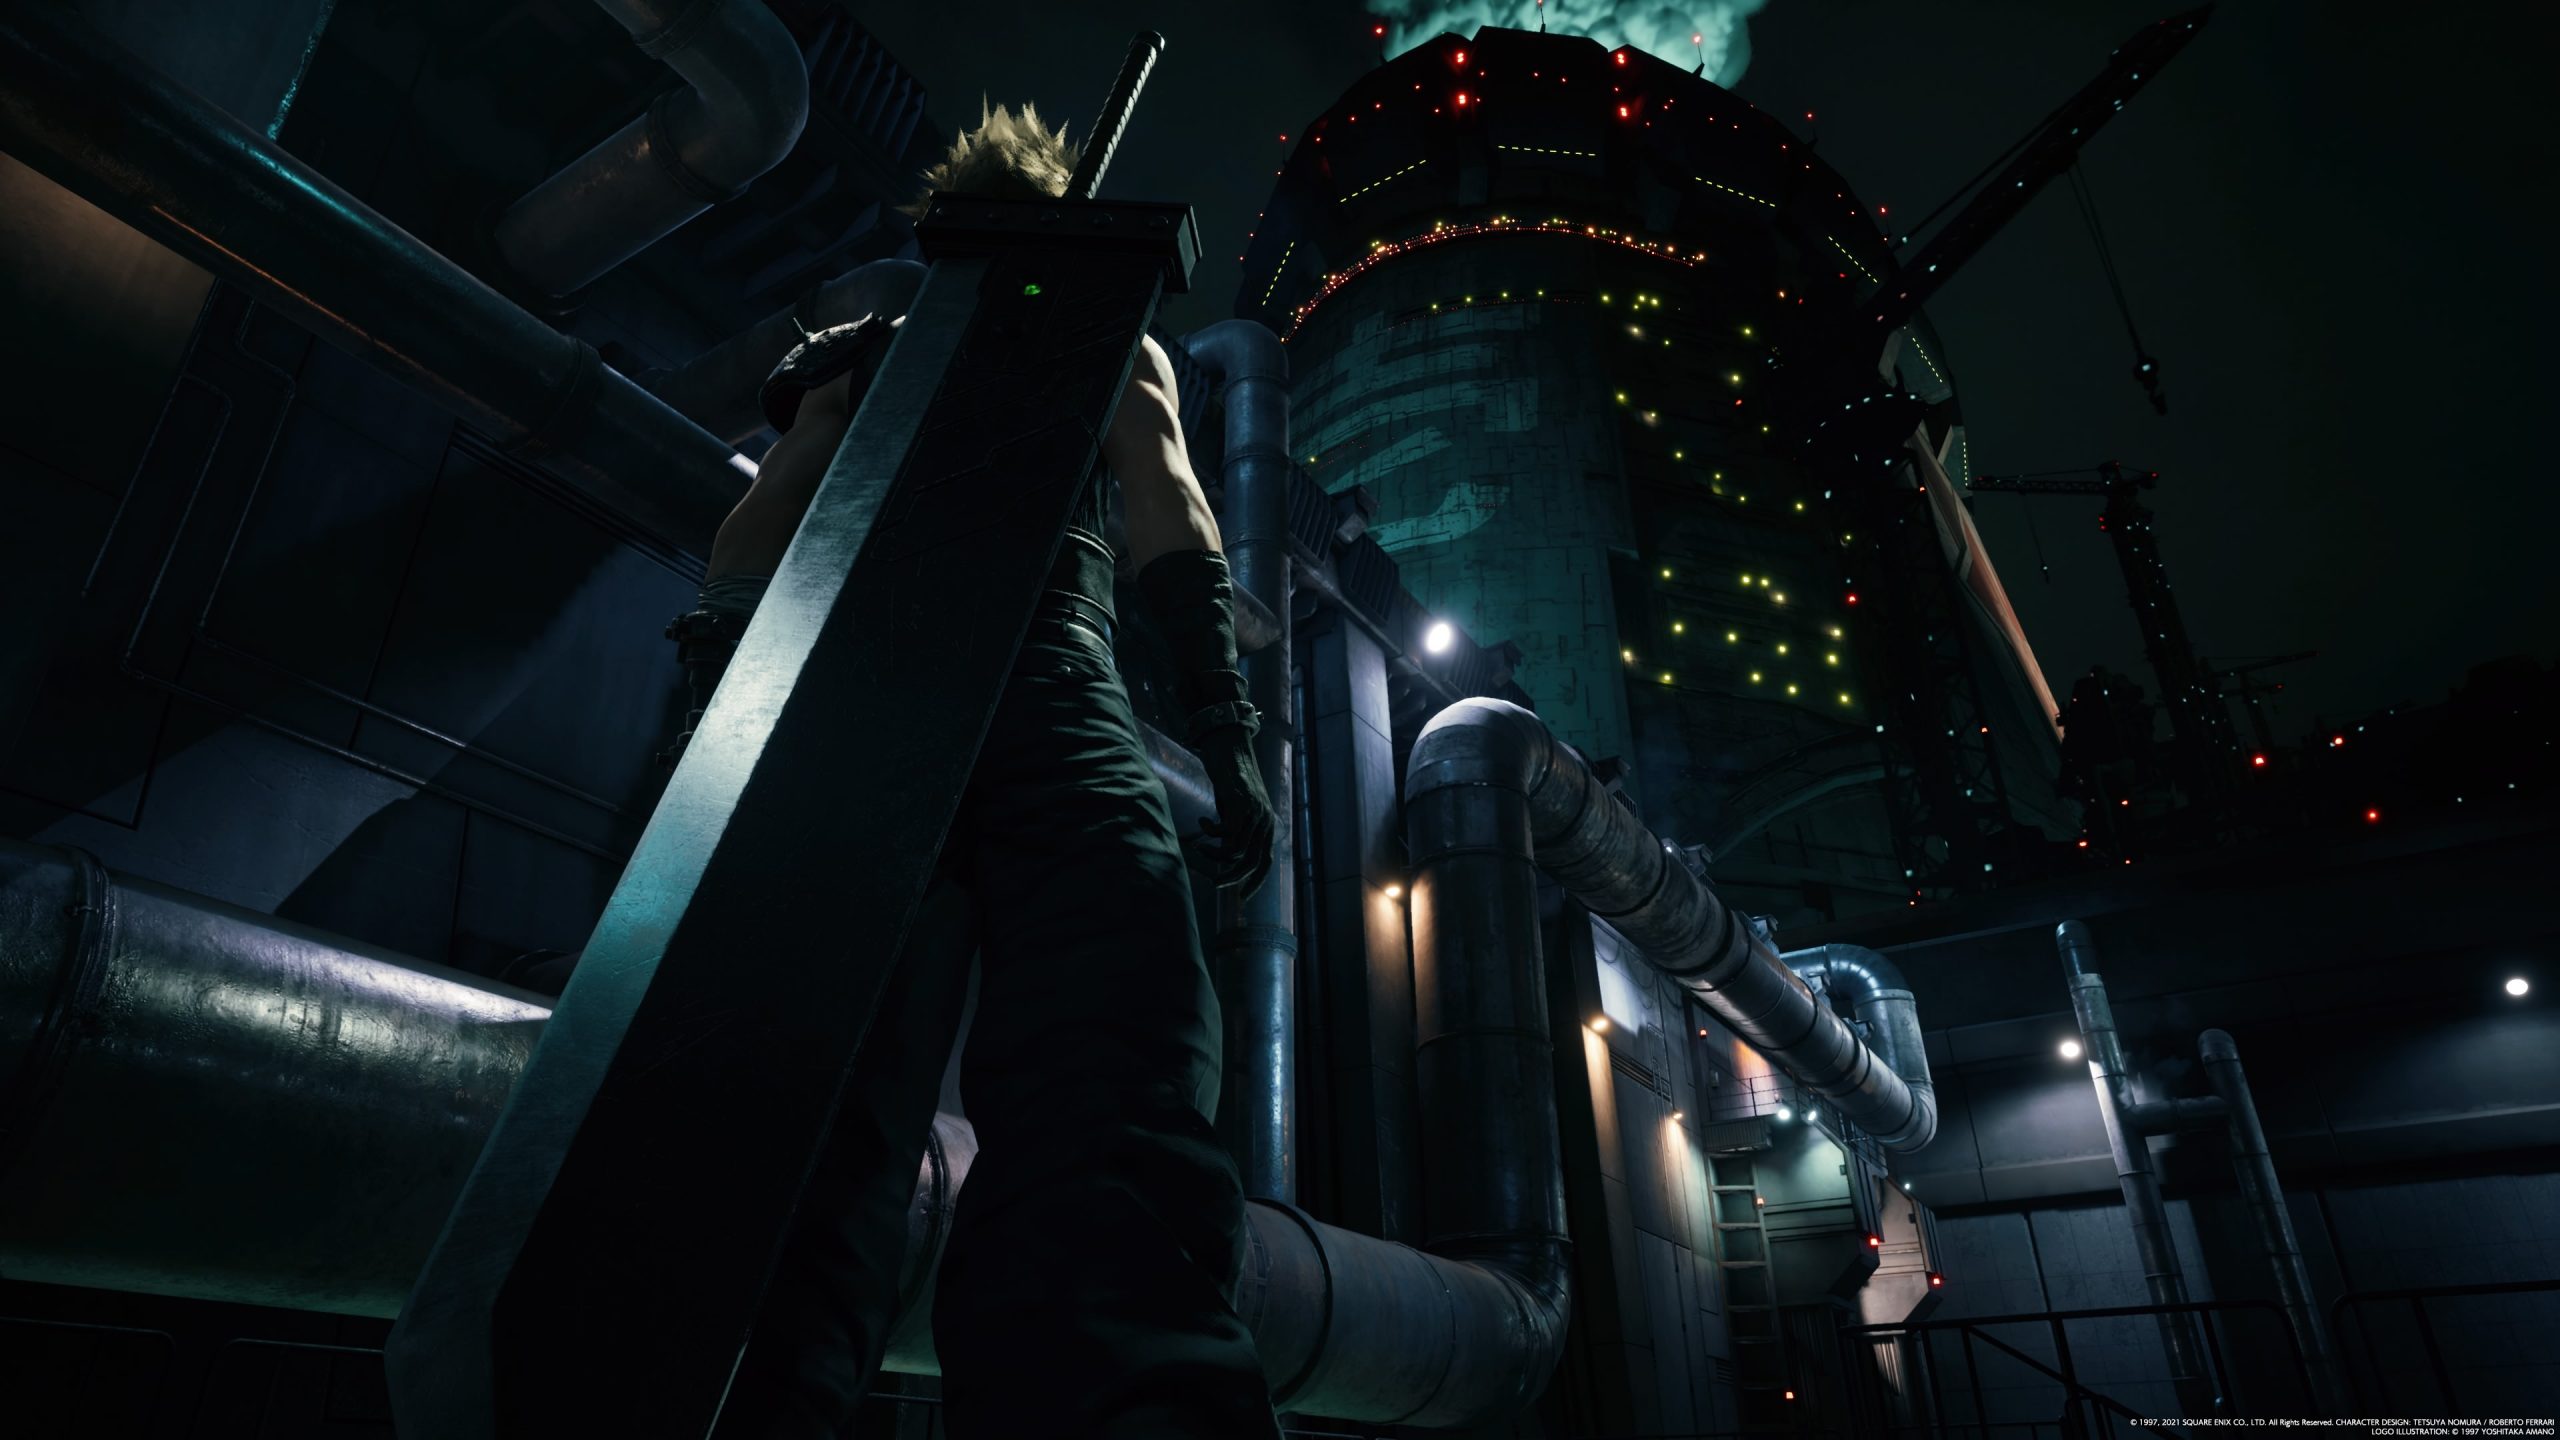 Final Fantasy VII Remake Is Even Getting Next-Gen Game Expenses To PC